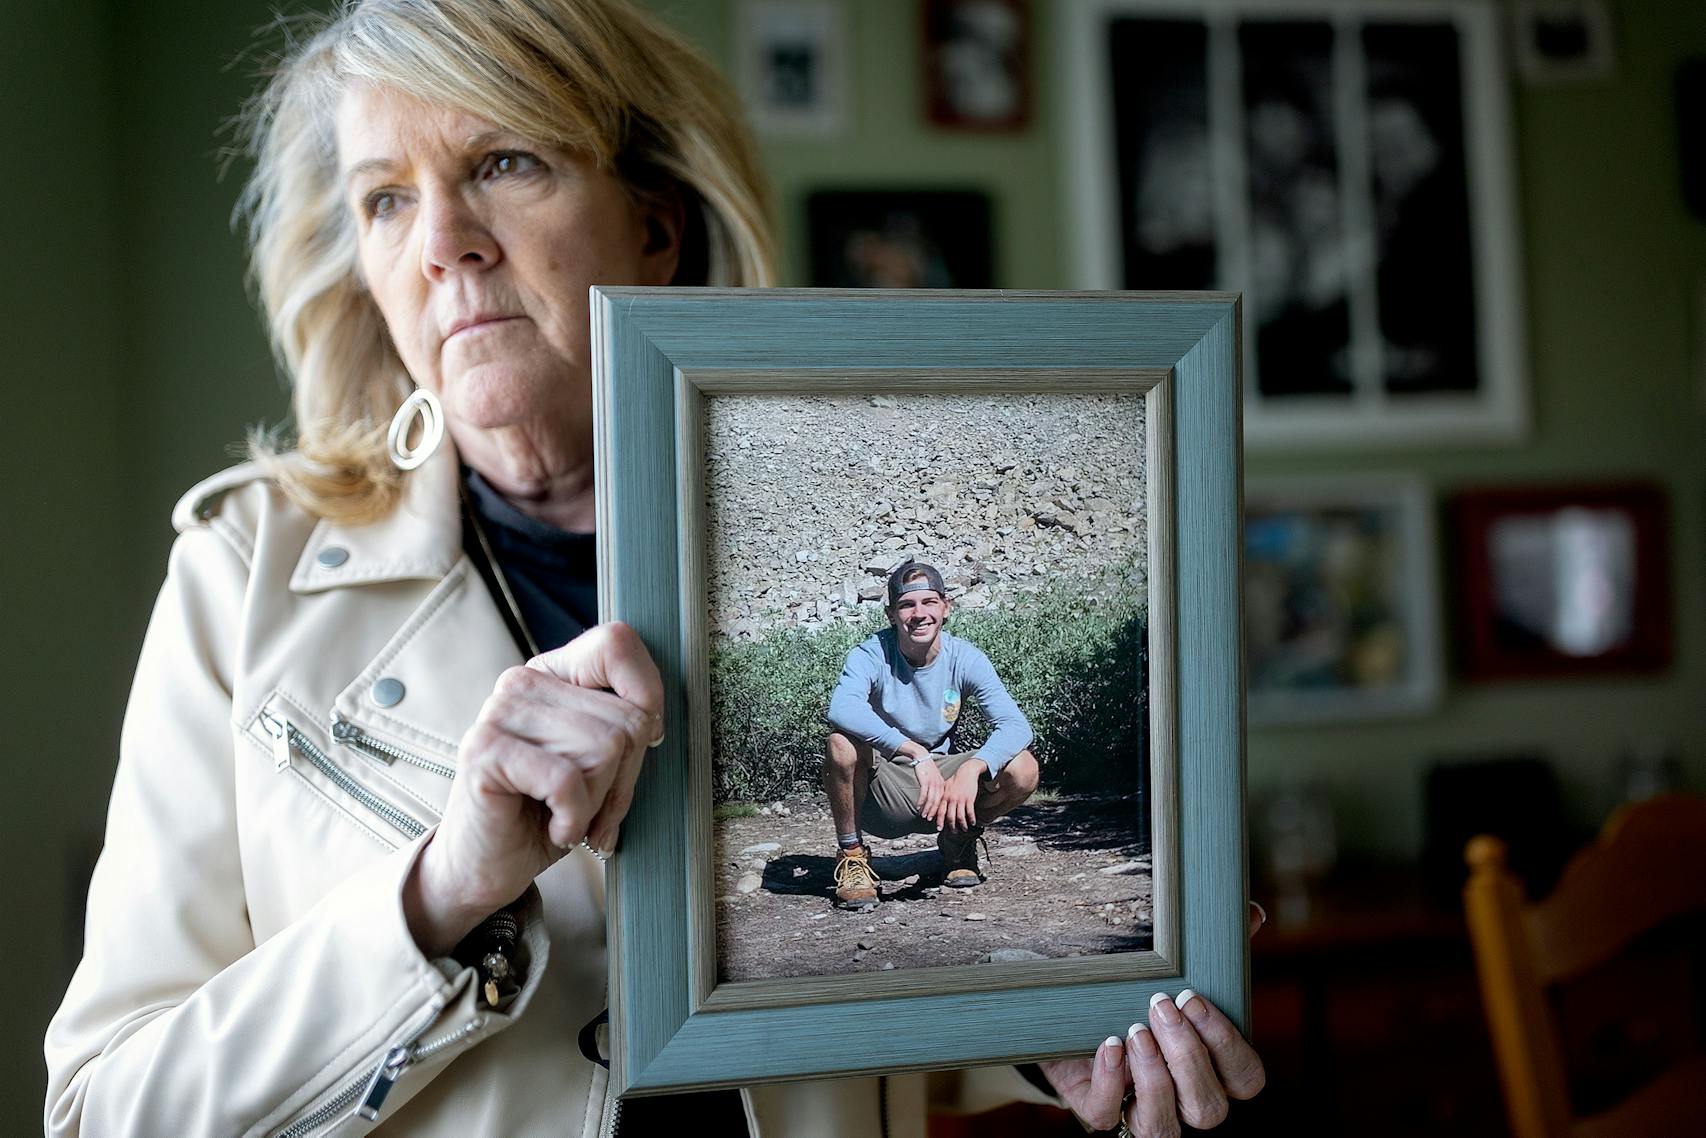 Pam Lanhart's son Jake died of a fentanyl drug overdose in 2021. Lanhart has turned her grief into activism, challenging views about how family members should respond to the opioid epidemic. 